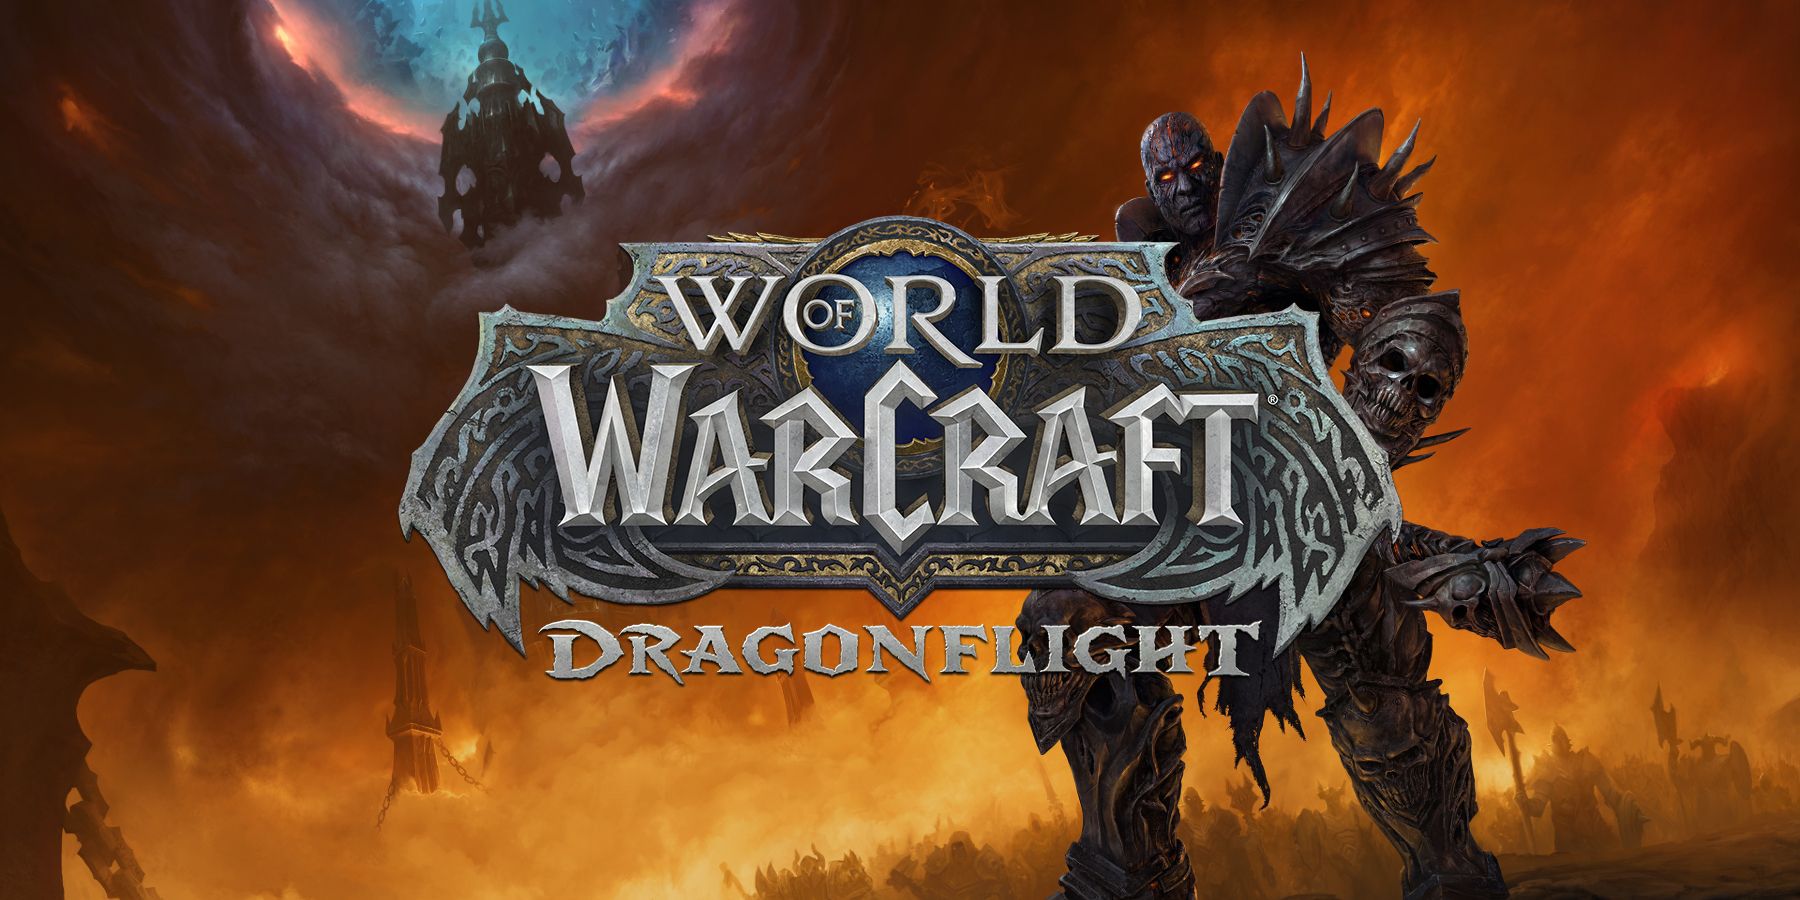 dragonflight shadowlands wow world of warcraft threads of fate removed featured